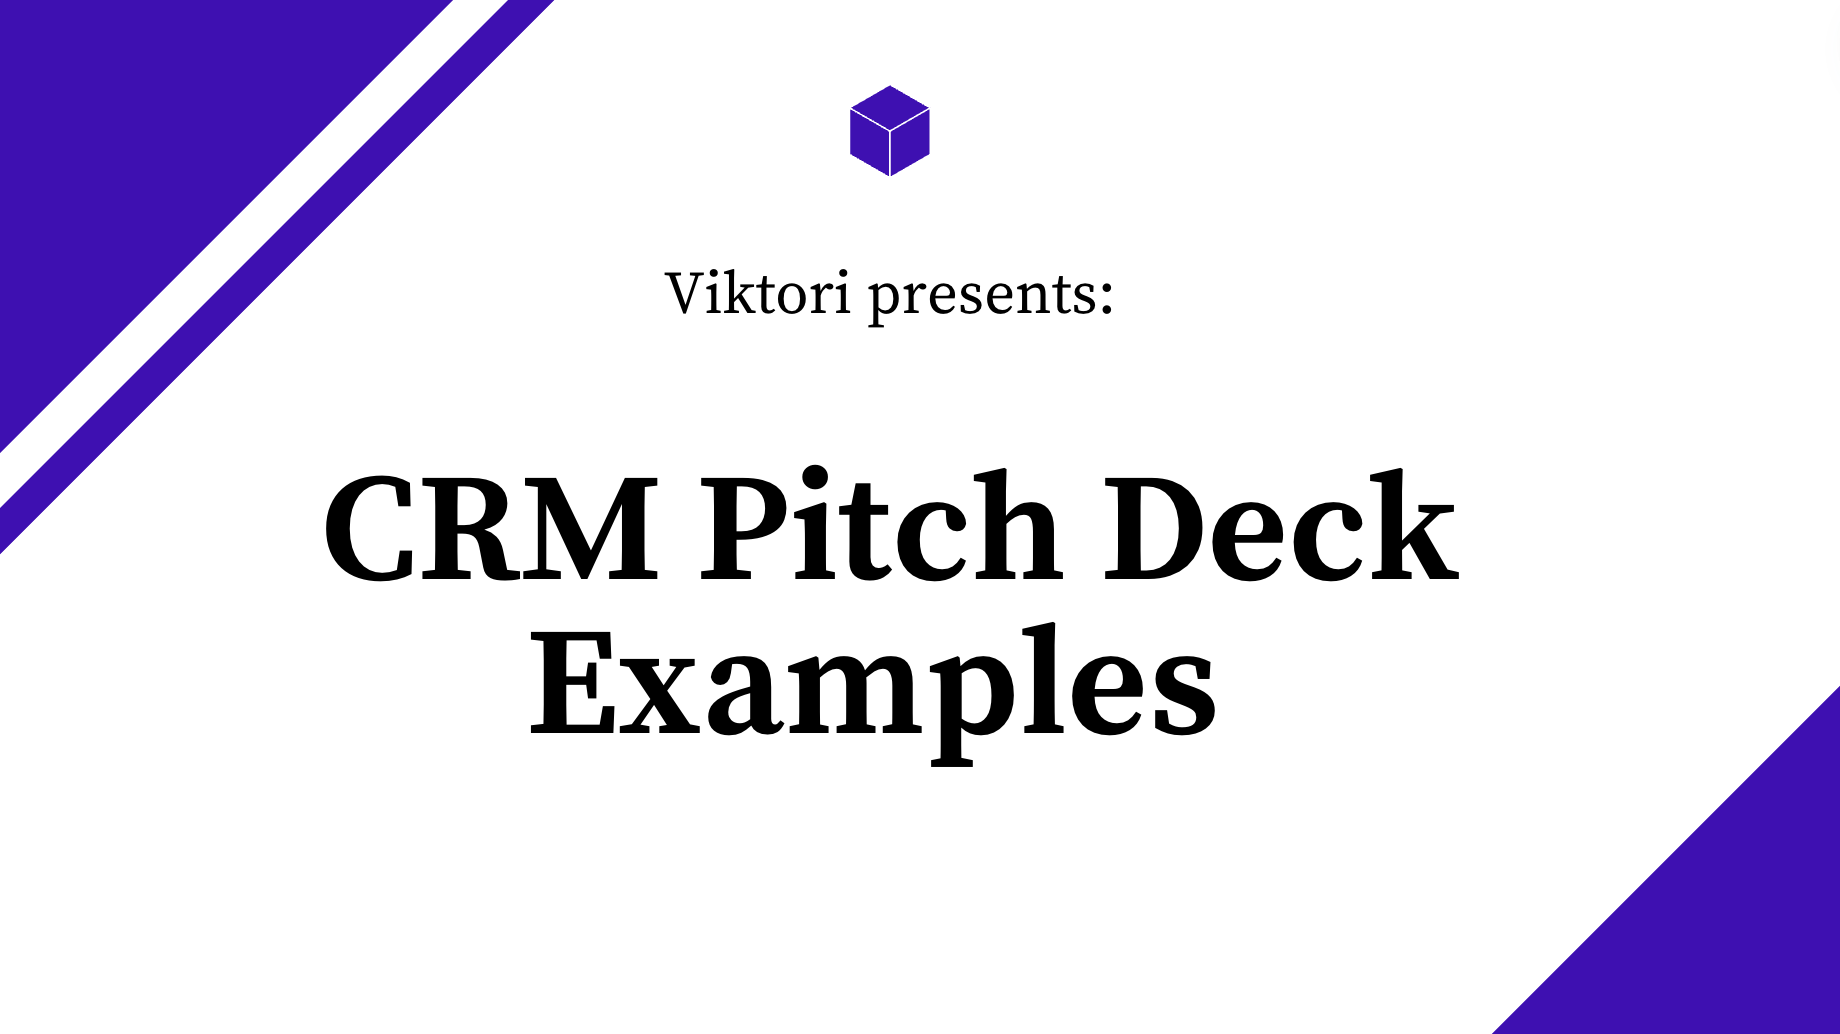 crm pitch deck example outlines